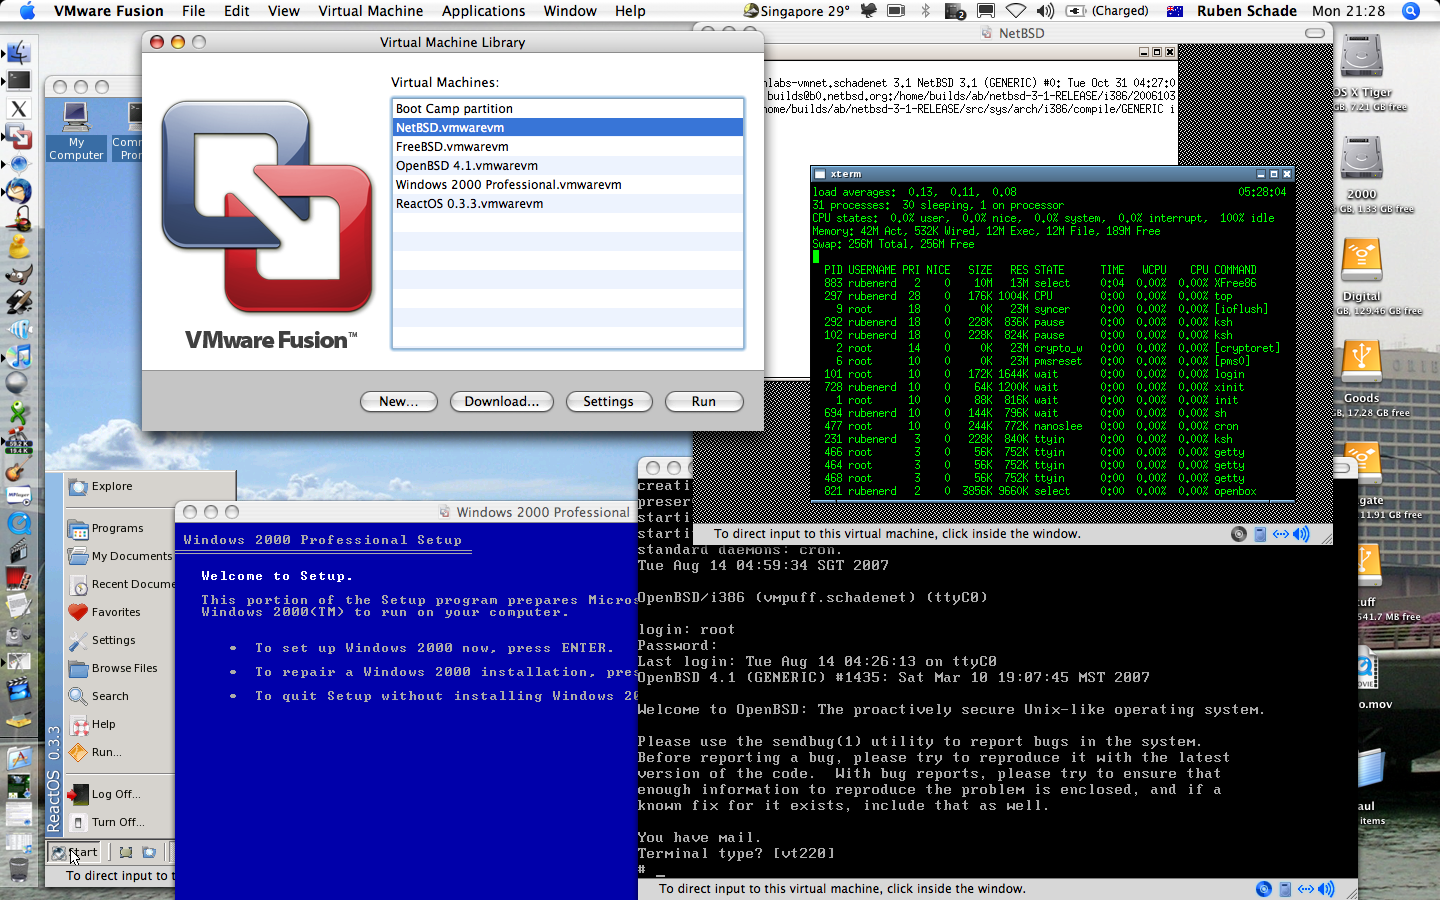 Torrent For Mac Os X On Vmware